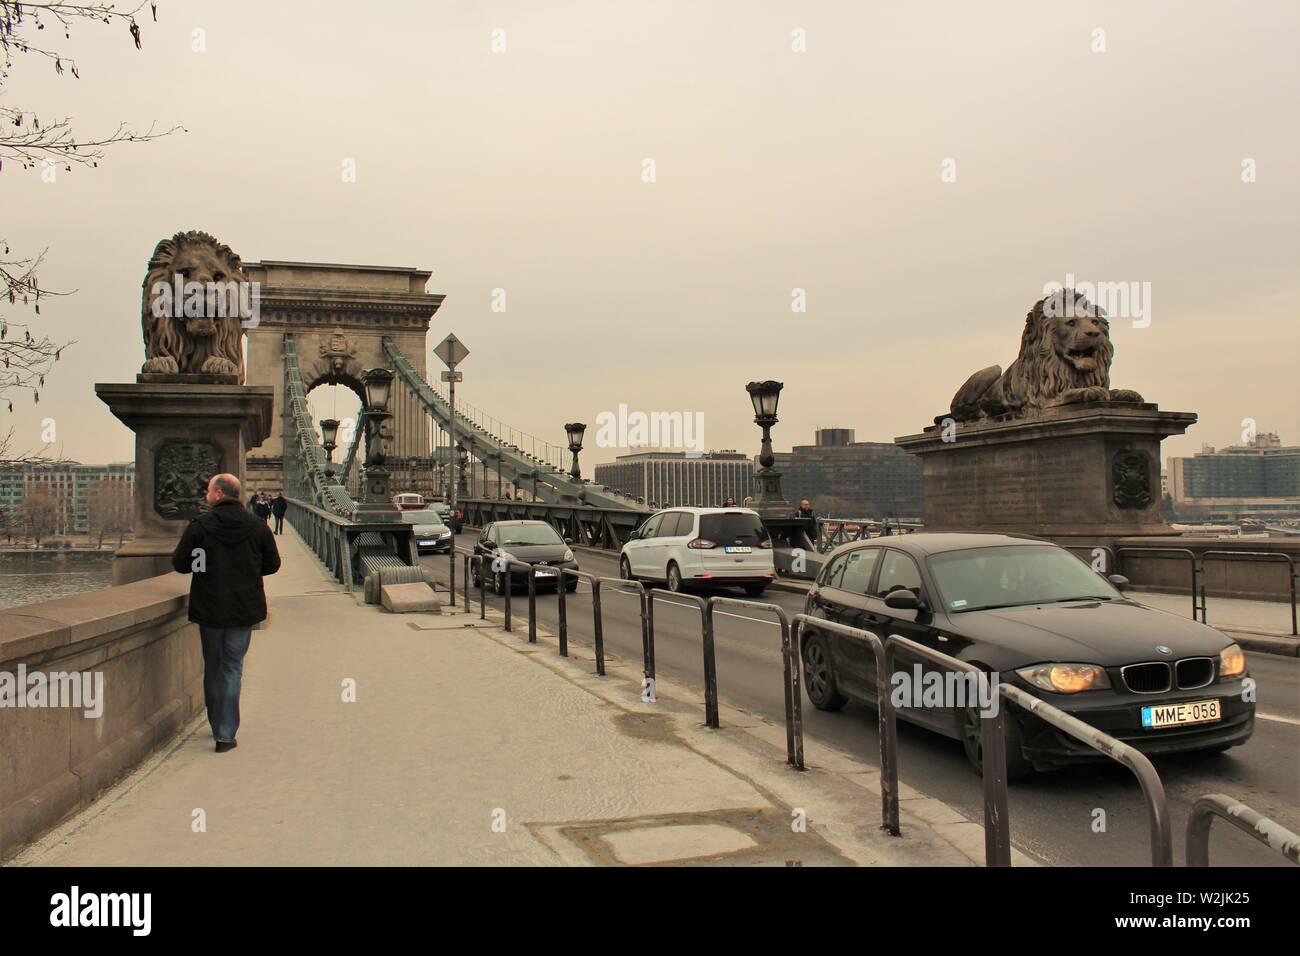 Pedestrians and vehicles in Budapest, using the Széchenyi chain bridge to cross over the Danube river between the Buda and Pest sides of the city. Stock Photo